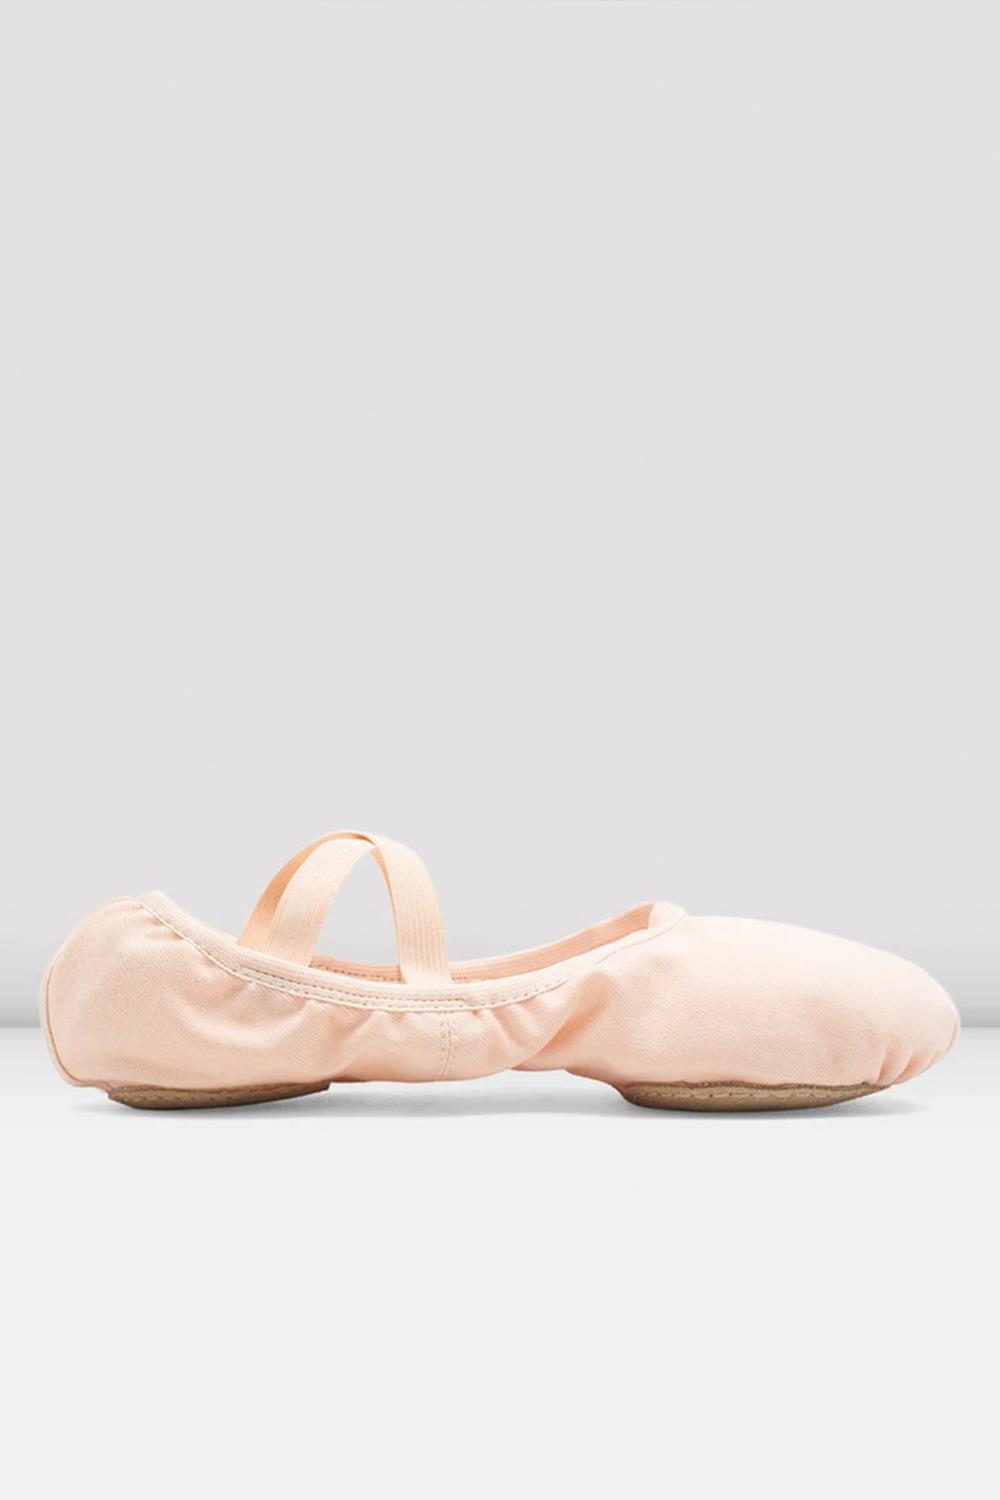 PERFORMA STRETCH CANVAS BALLET SHOES - THEATRICAL PINK - NISARAT